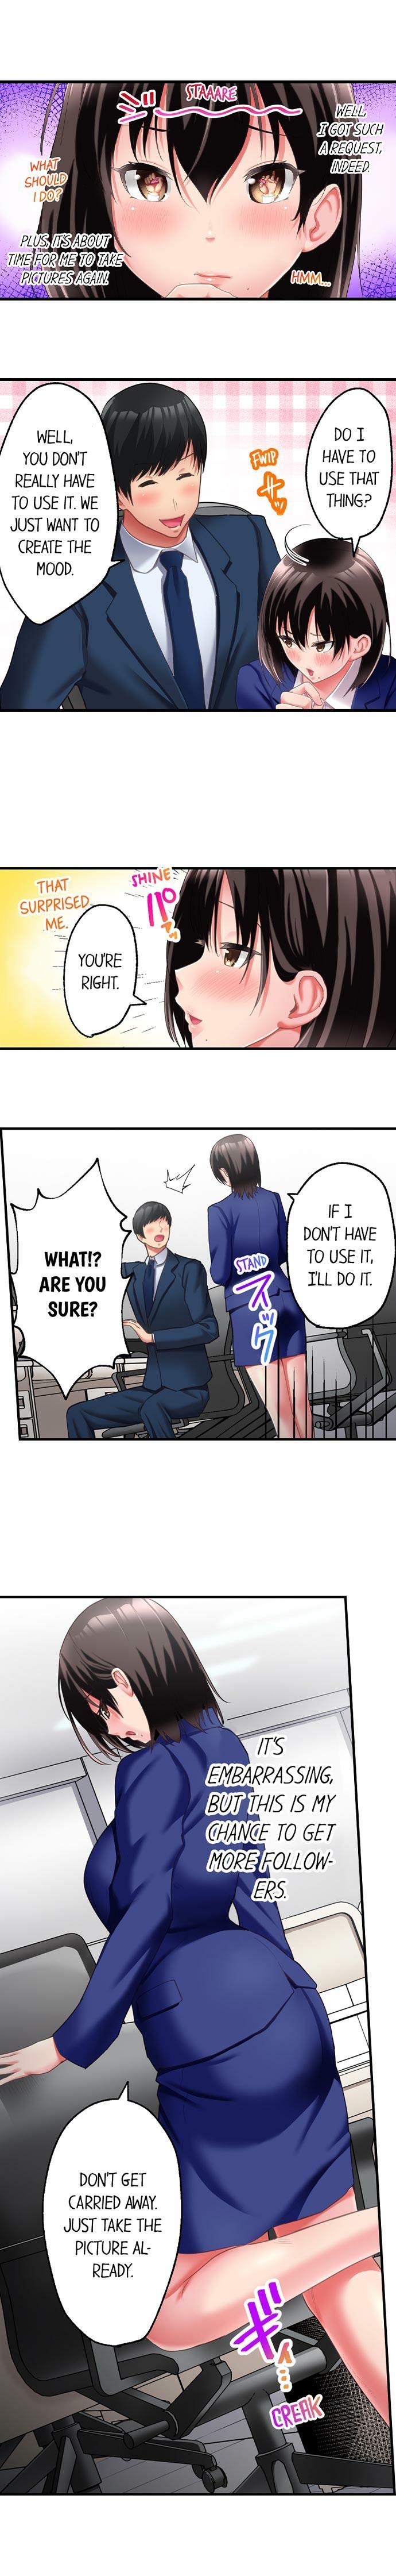 [Kayanoi Ino] Busted by my Co-Worker 18/18 [English] Completed 123